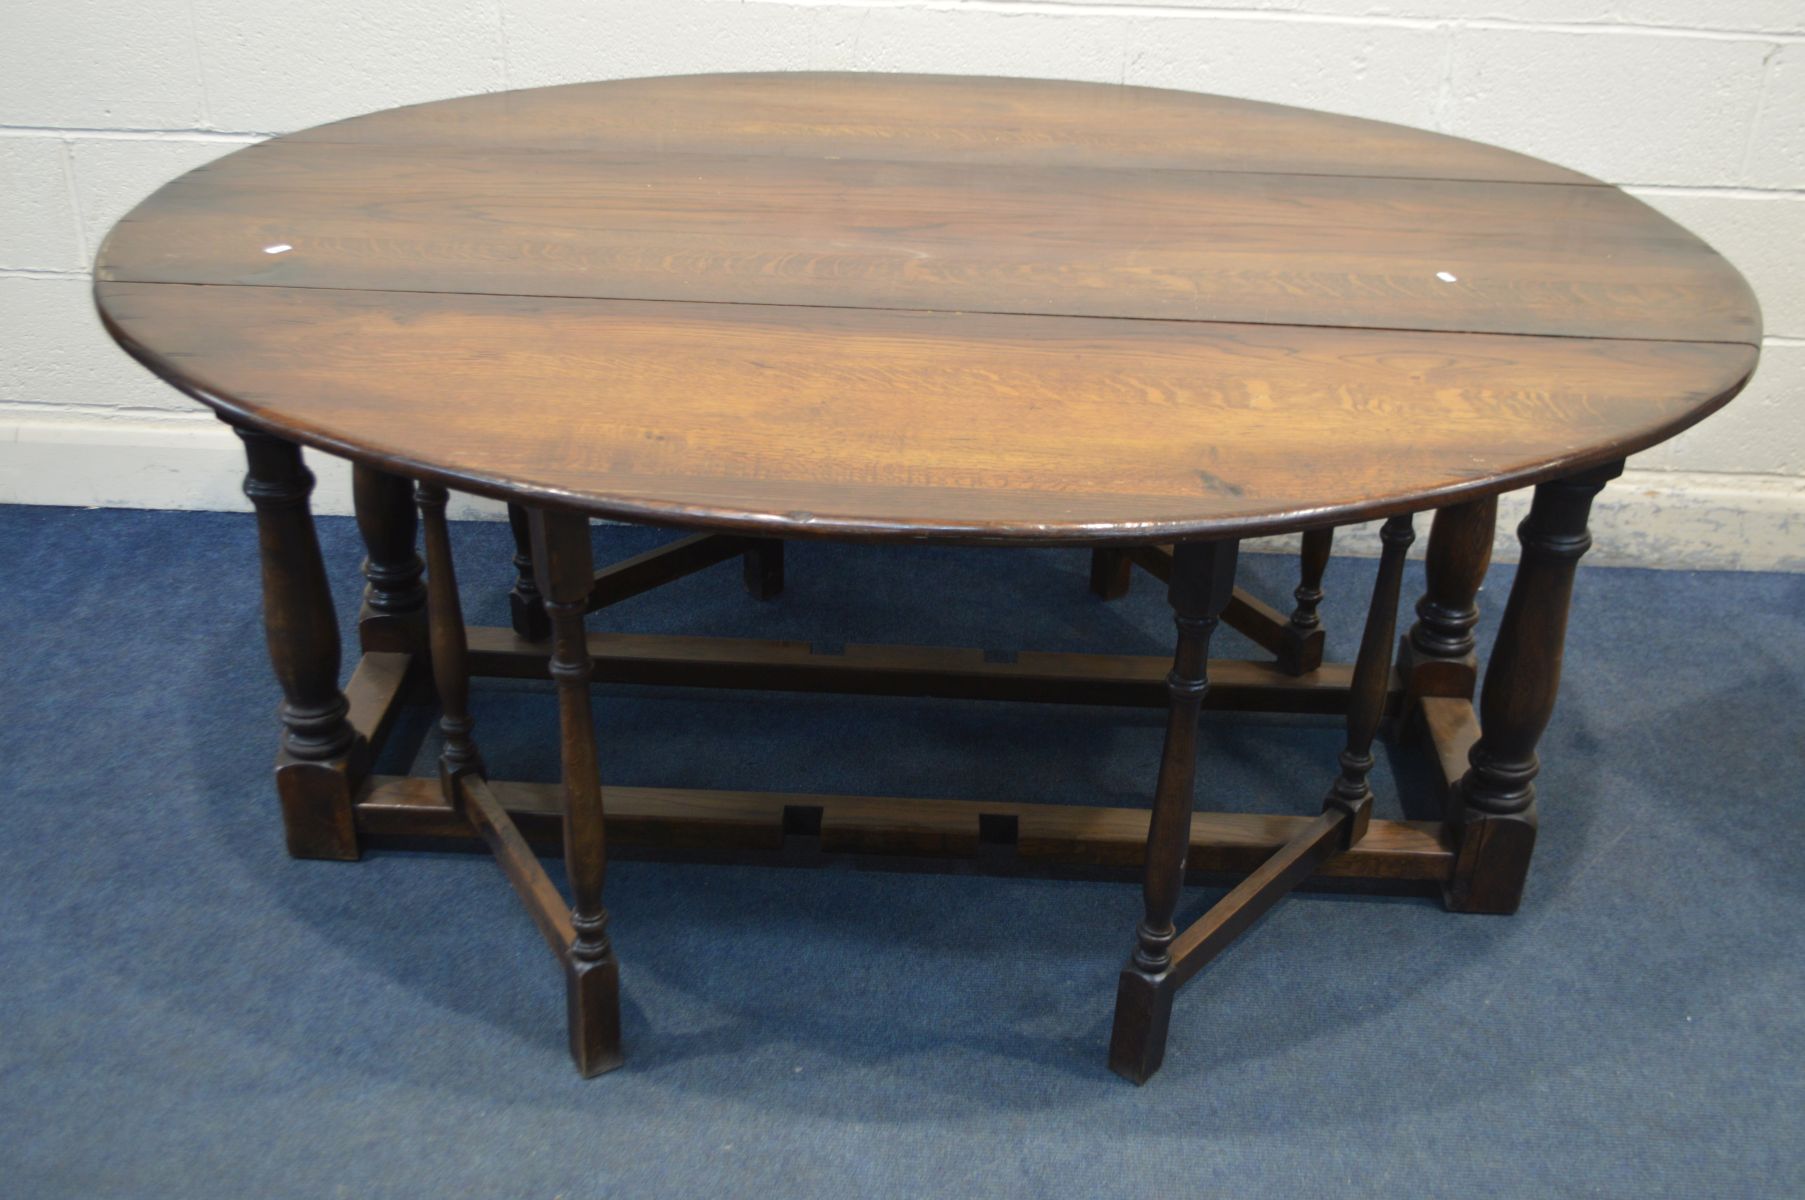 A 18TH CENTURY STYLE OAK WAKE TABLE, oval top with fall leaves, on turned and block legs, length